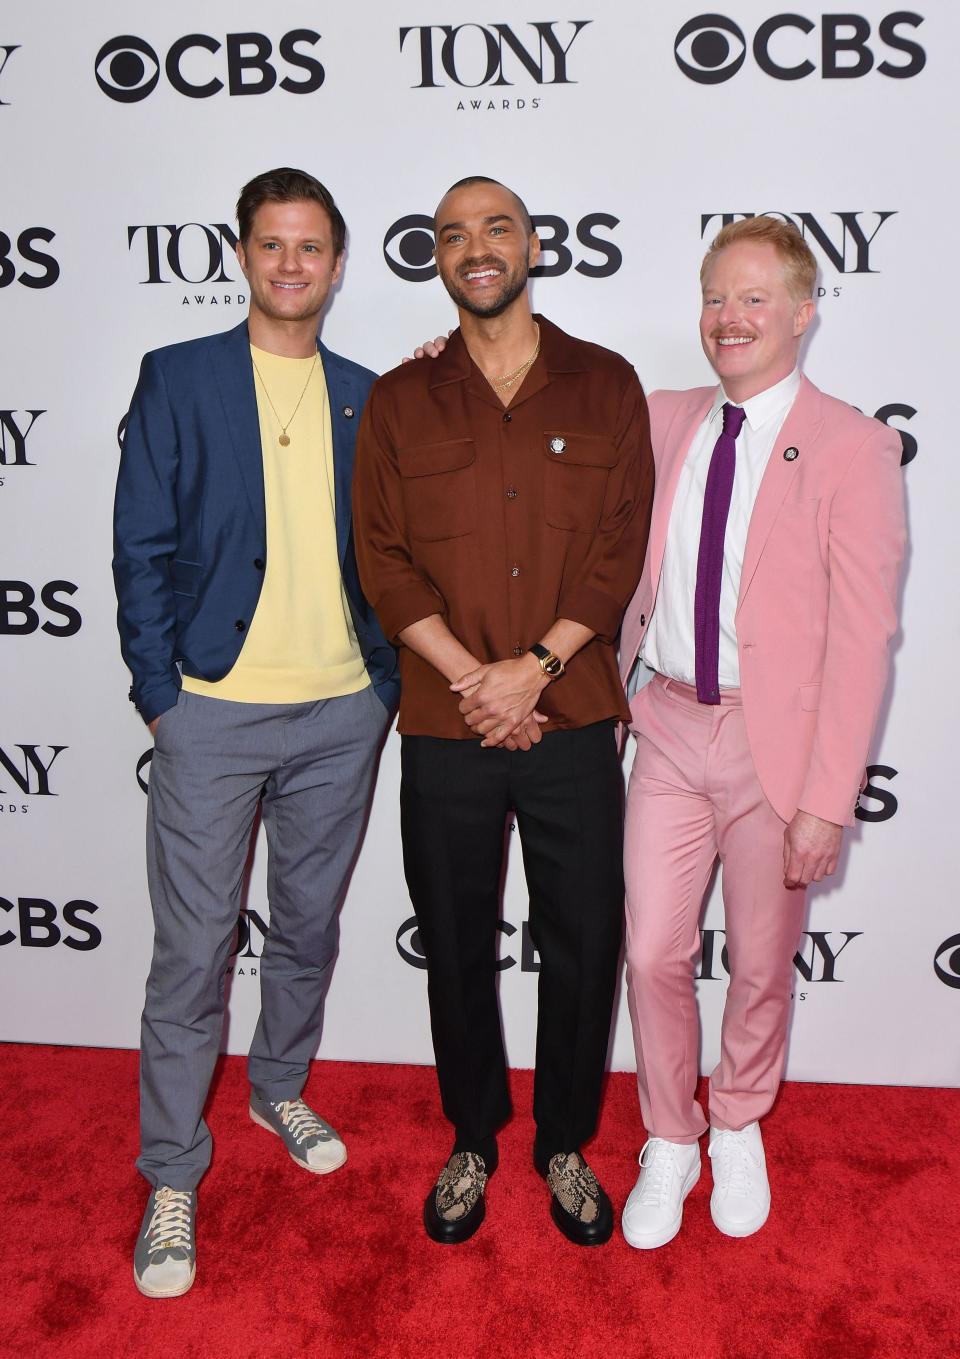 (L-R) Michael Oberholtzer, Jesse Williams and Jesse Tyler Ferguson were nominated for best featured actor in a play for "Take Me Out" at the 2022 Tony Awards.